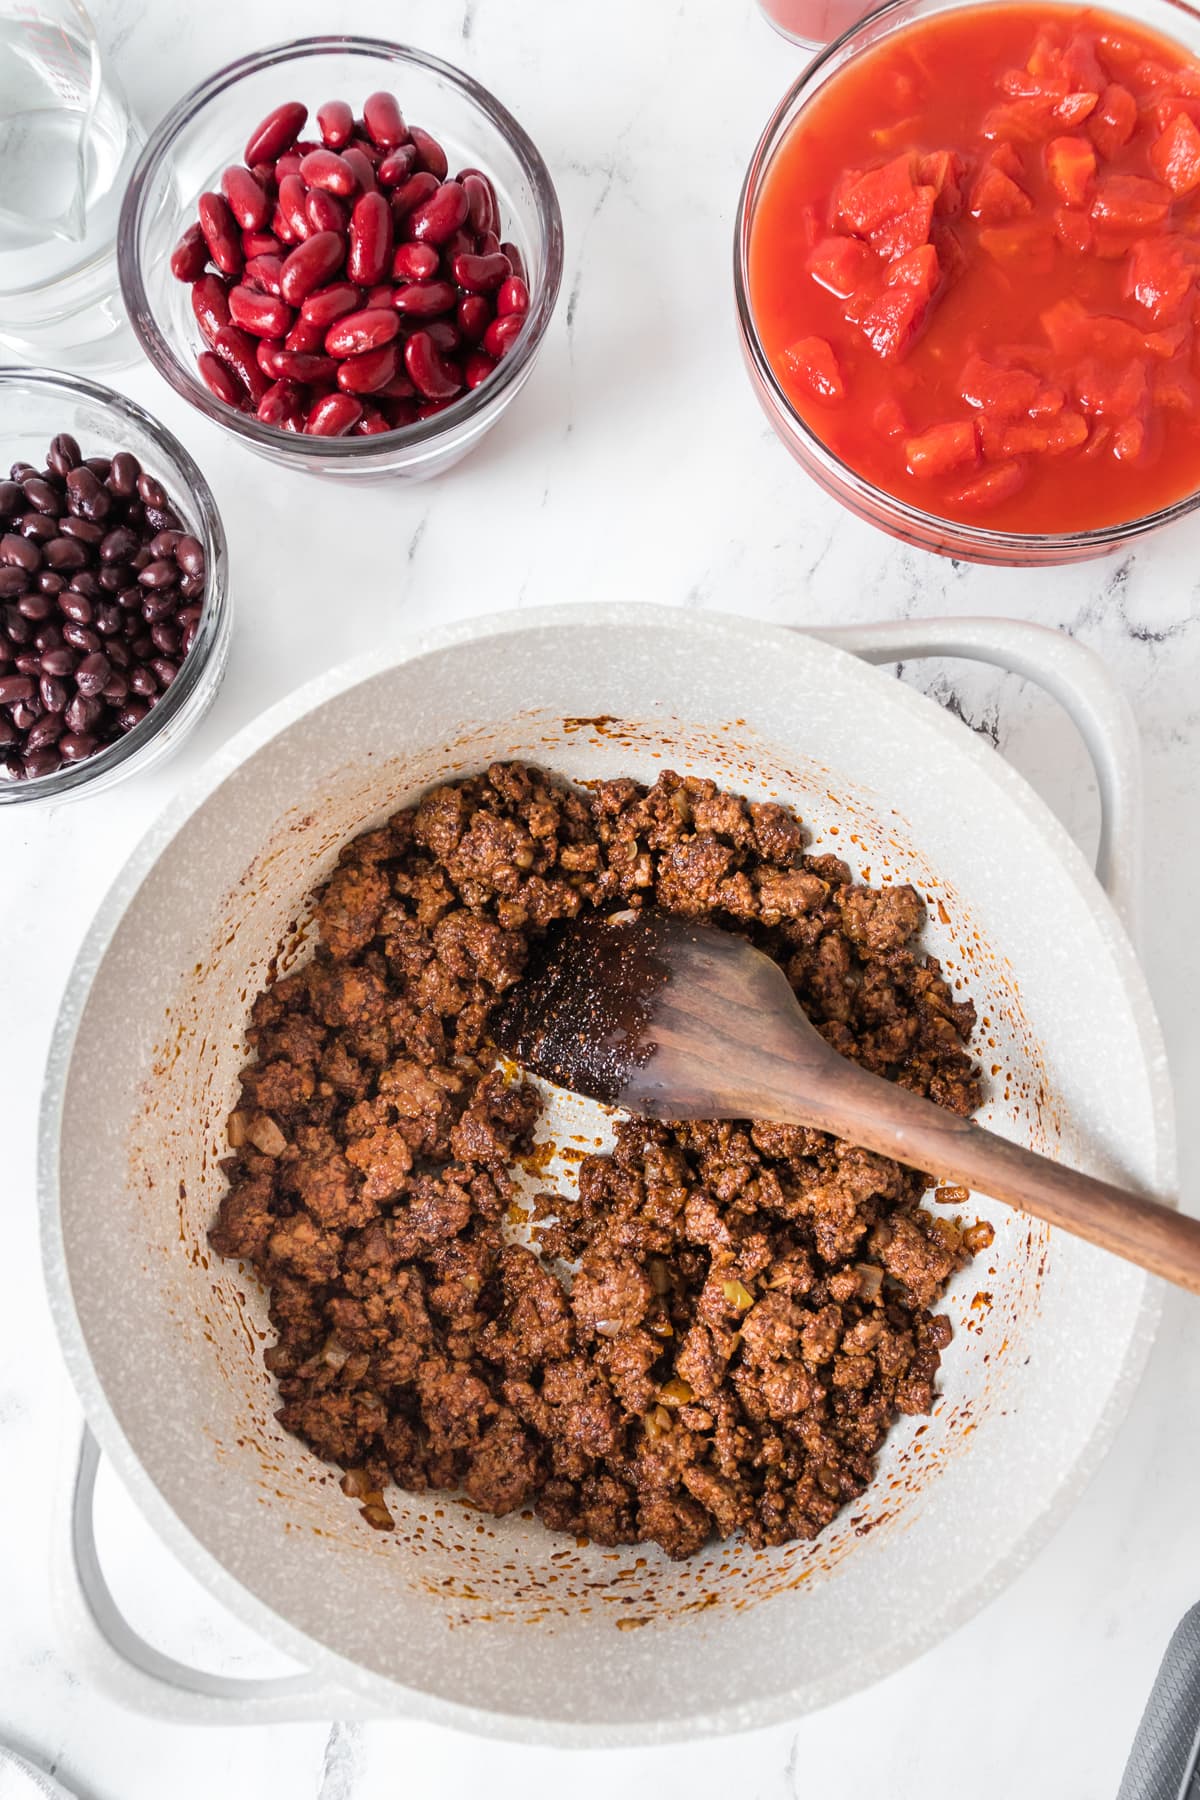 Seasoned ground beef in a pan next to diced tomatoes and two kinds of beans.